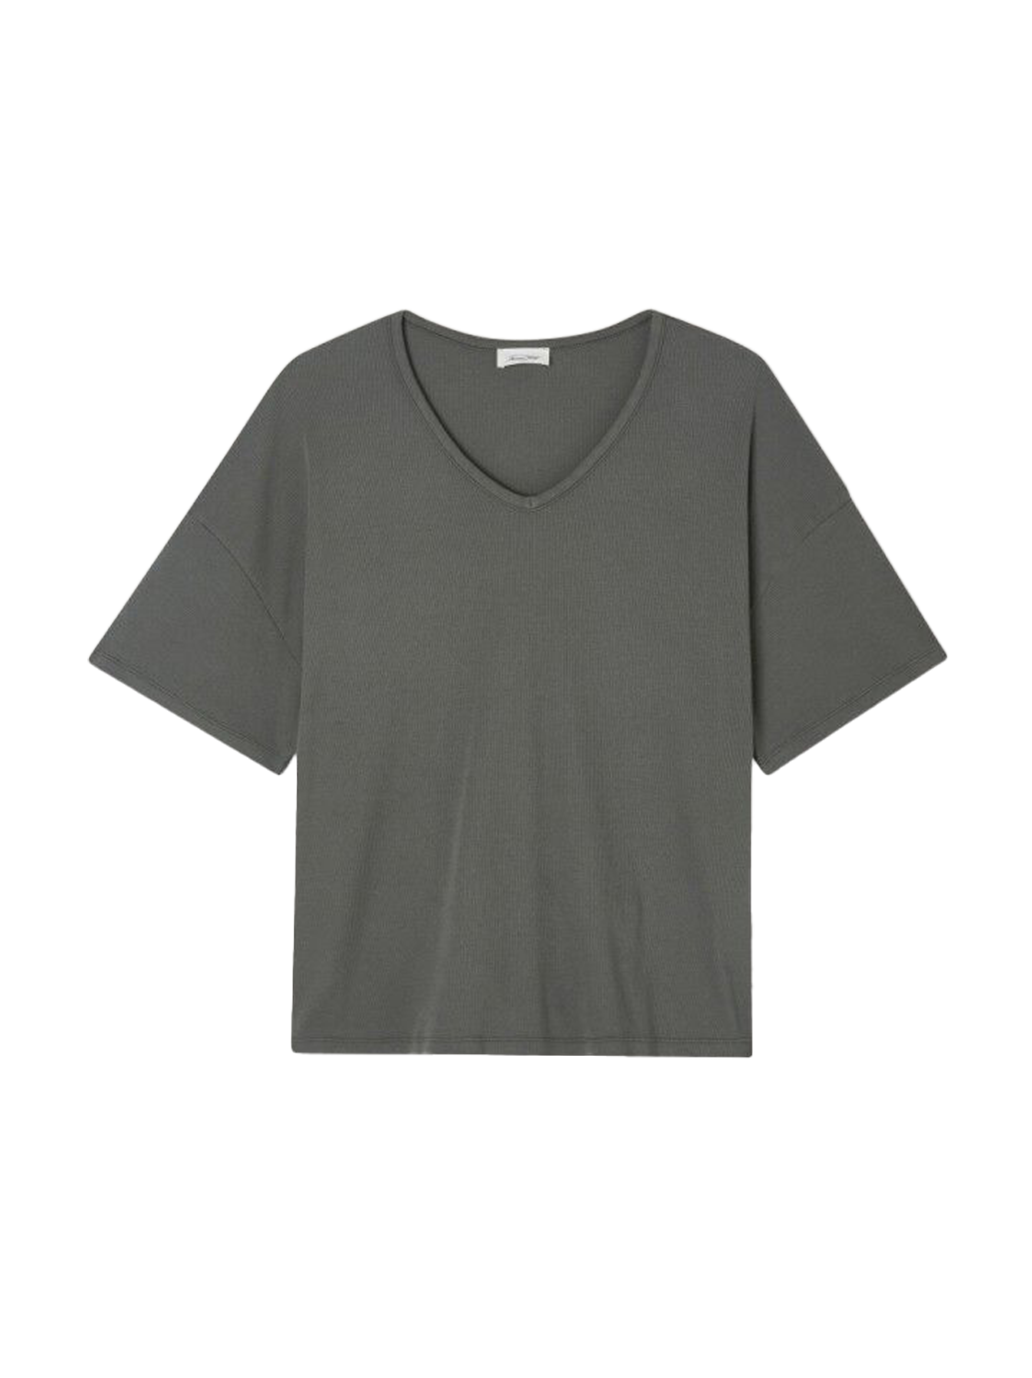 Oversize T-shirt in ribbed Zelym cotton